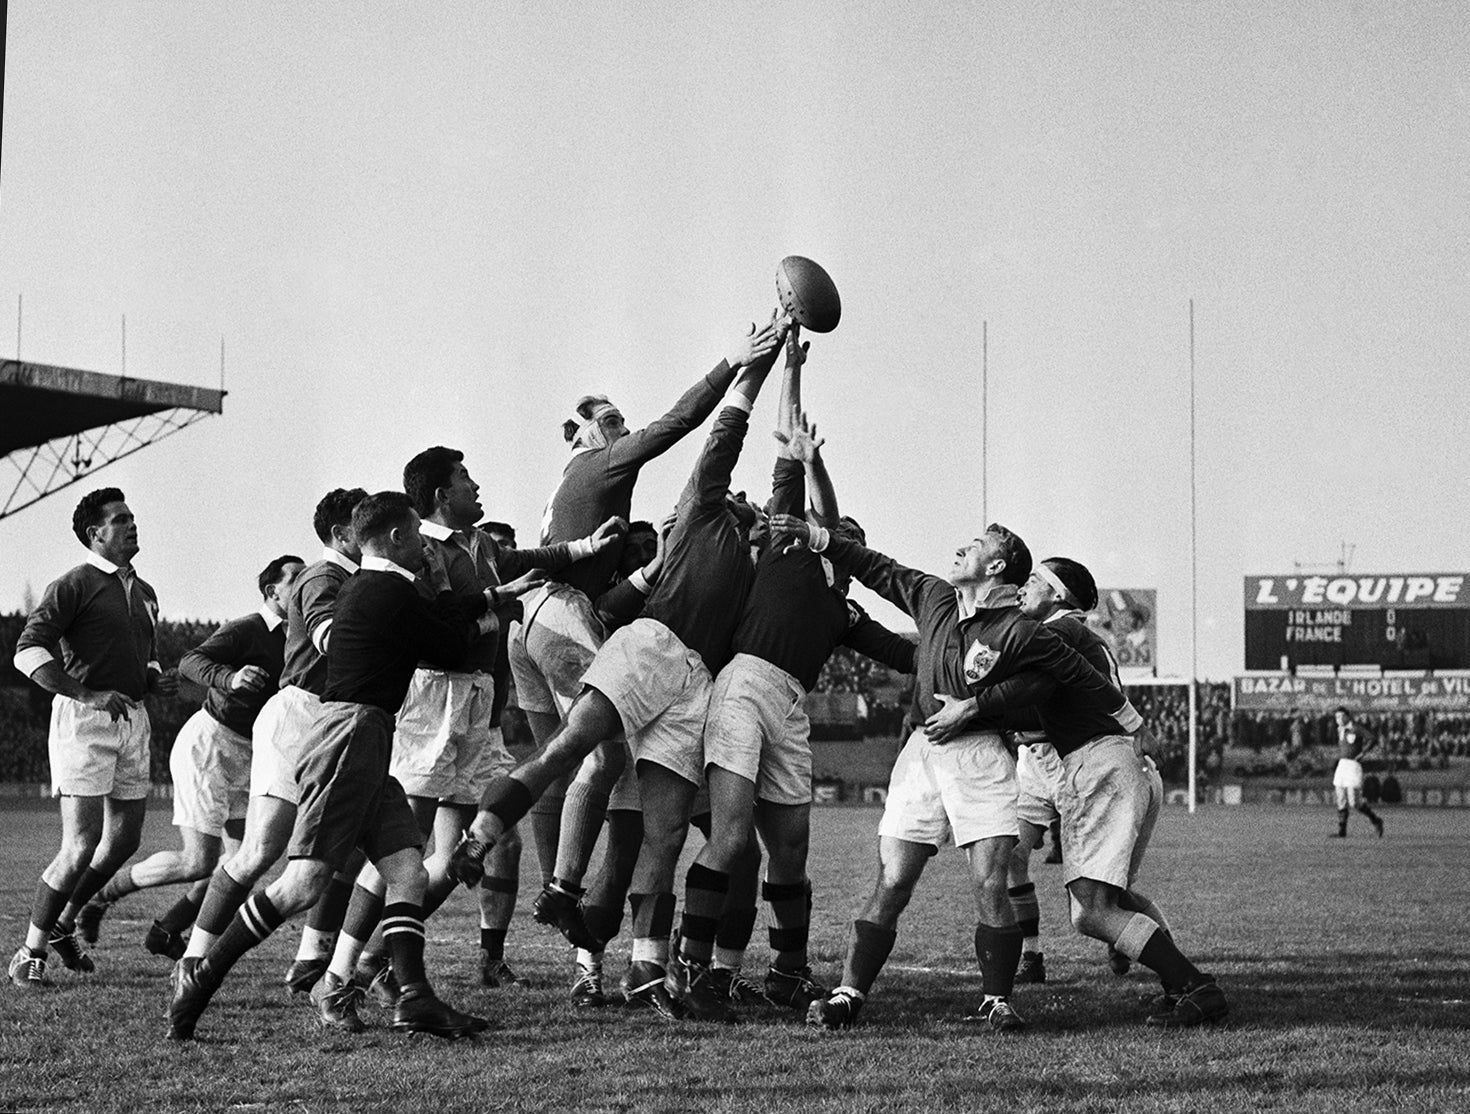 From the NS archive: Talking about rugby